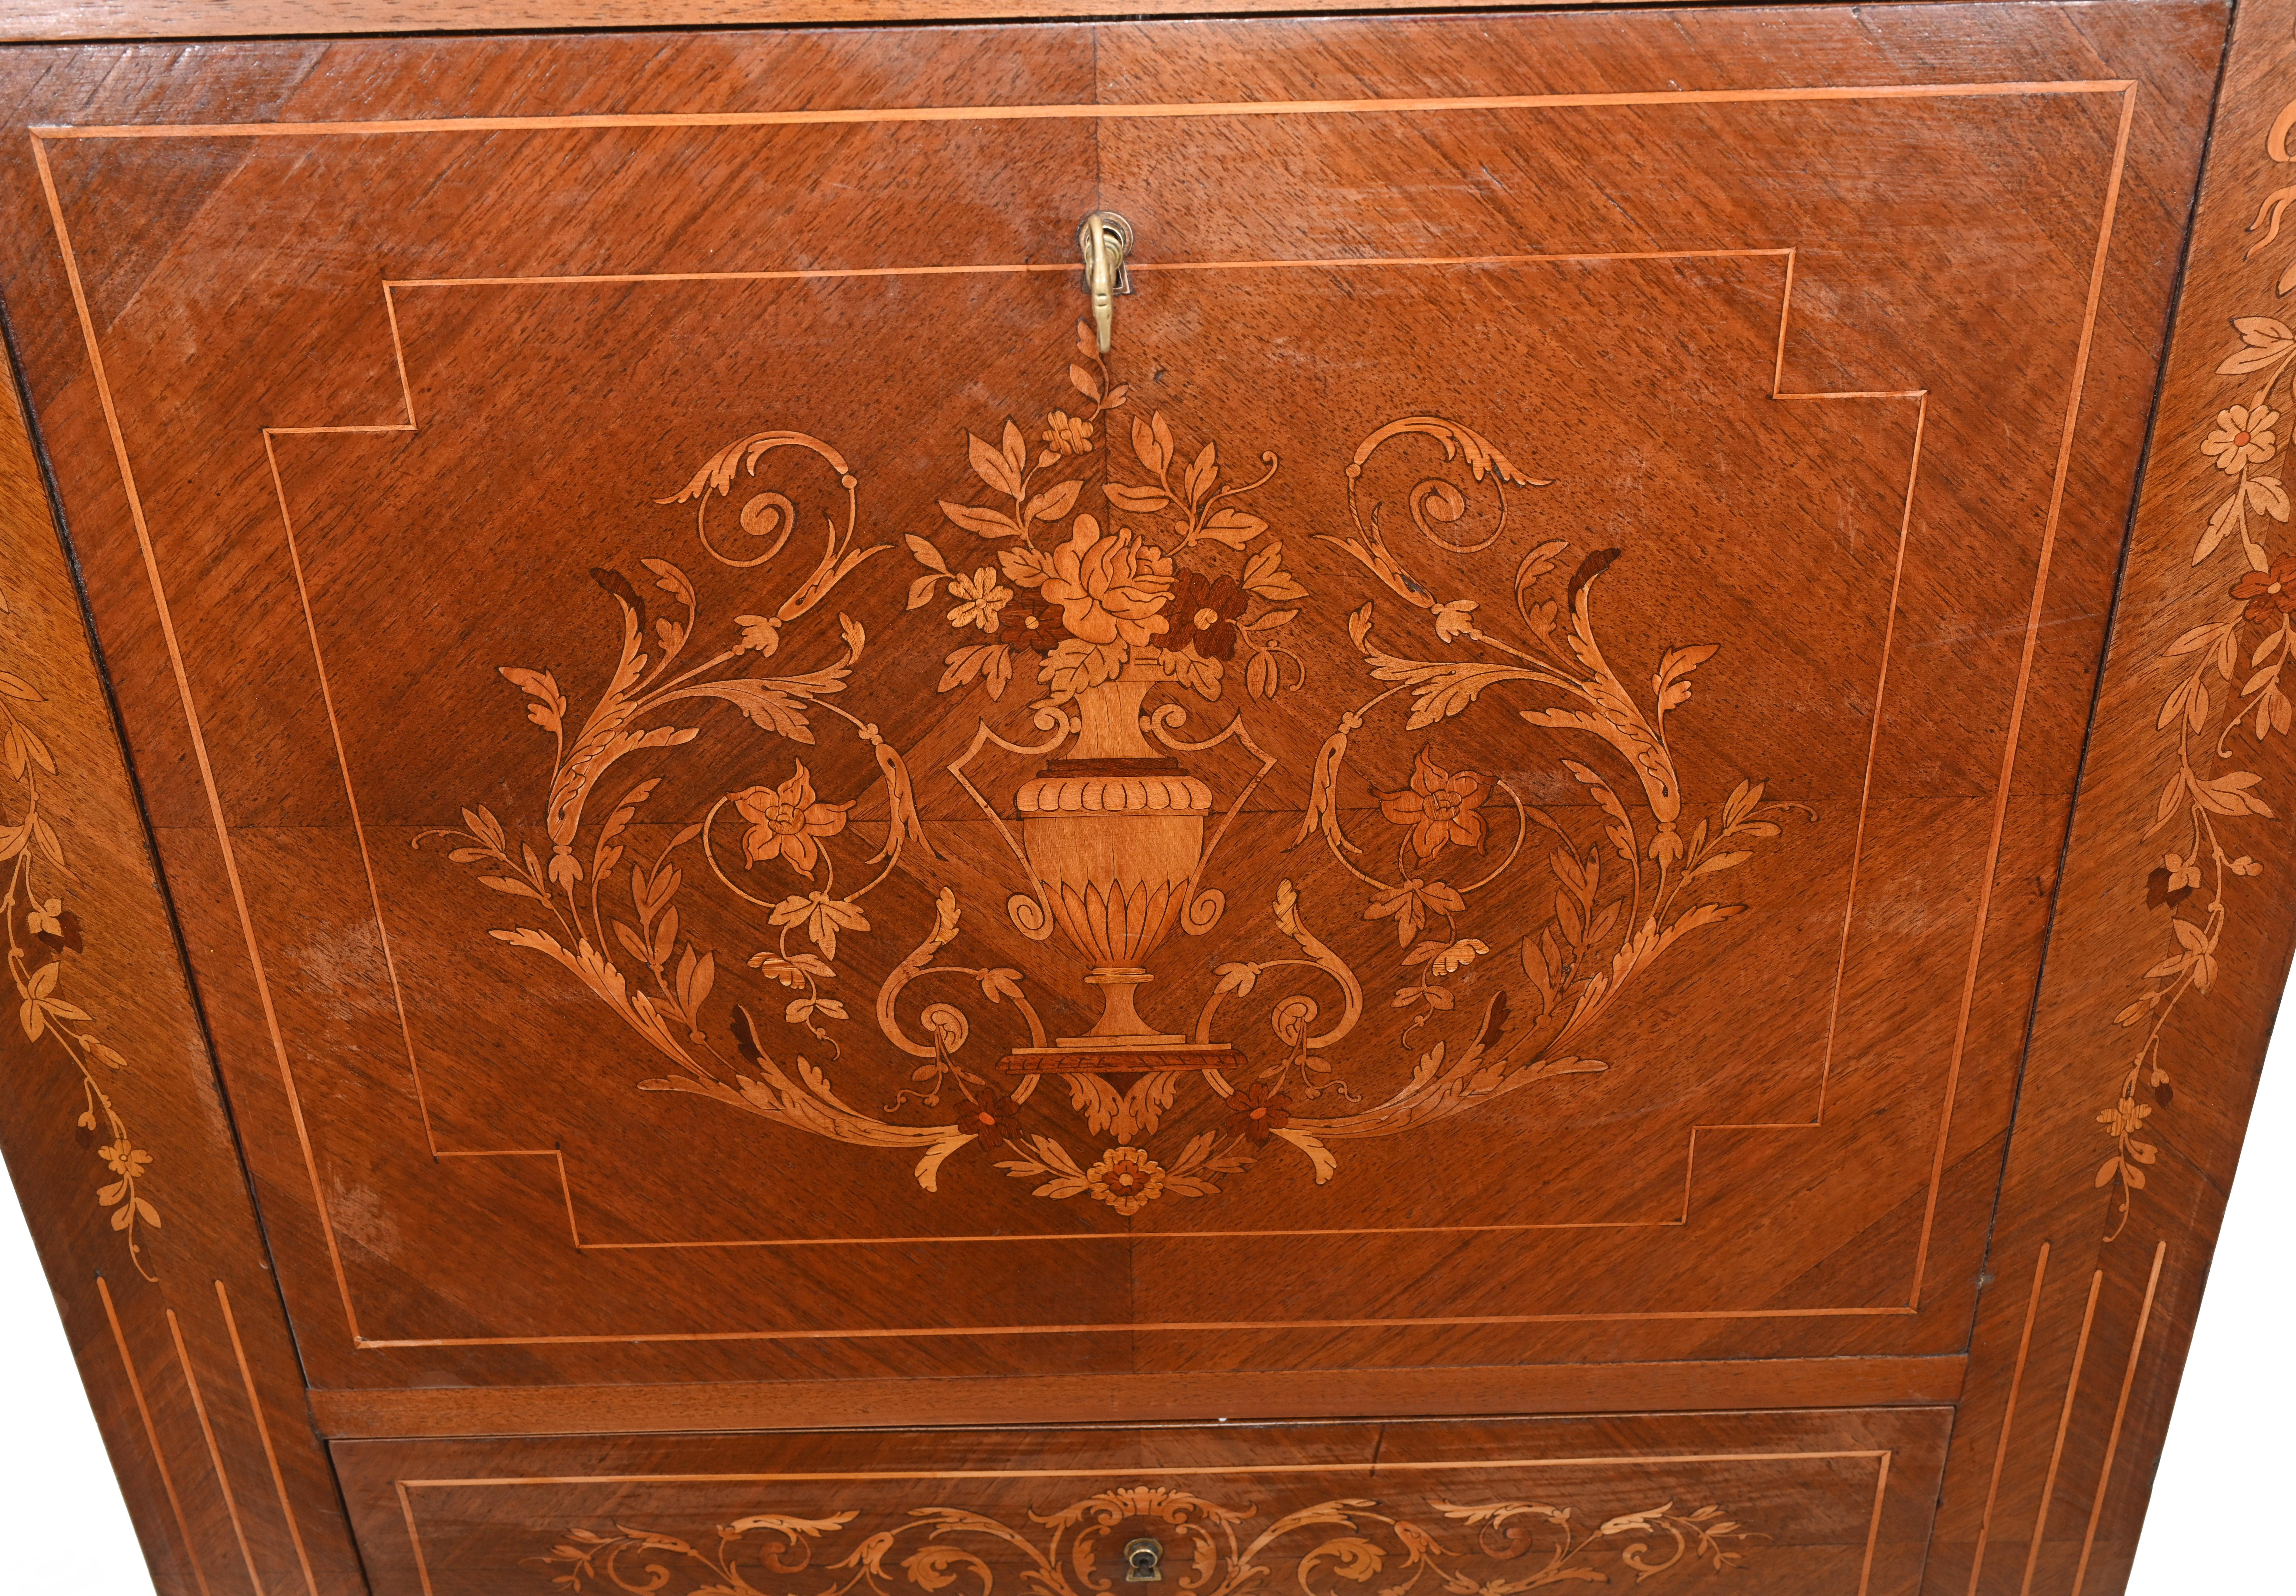 Stylish French Empire escritoire desk we date to circa 1880
Elegant inlay on the all sides shows floral motifs
Front opens out to reveal writing surface covered in red leather
Various cubby holes and drawers 
Charming space saving piece
Bought